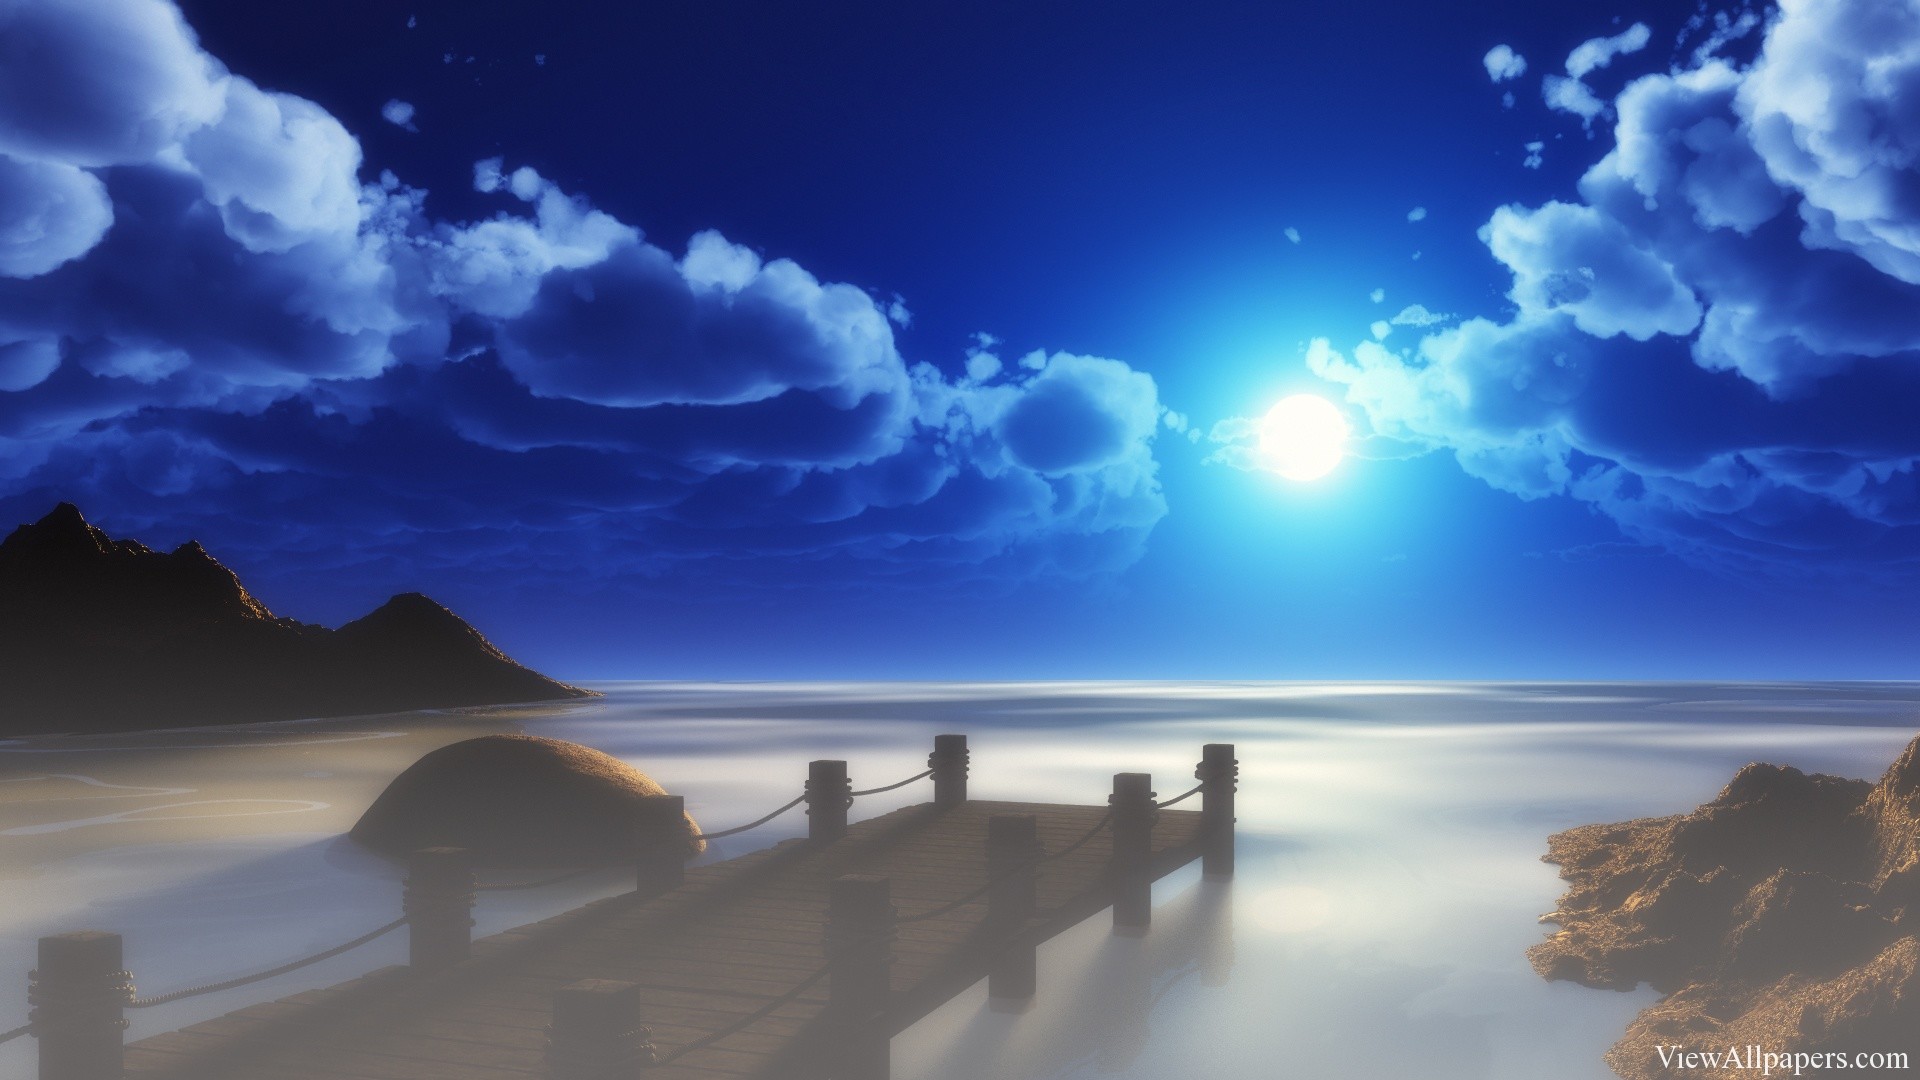 1920x1080 Beach At Night With Moon | Beaches HD Wallpapers